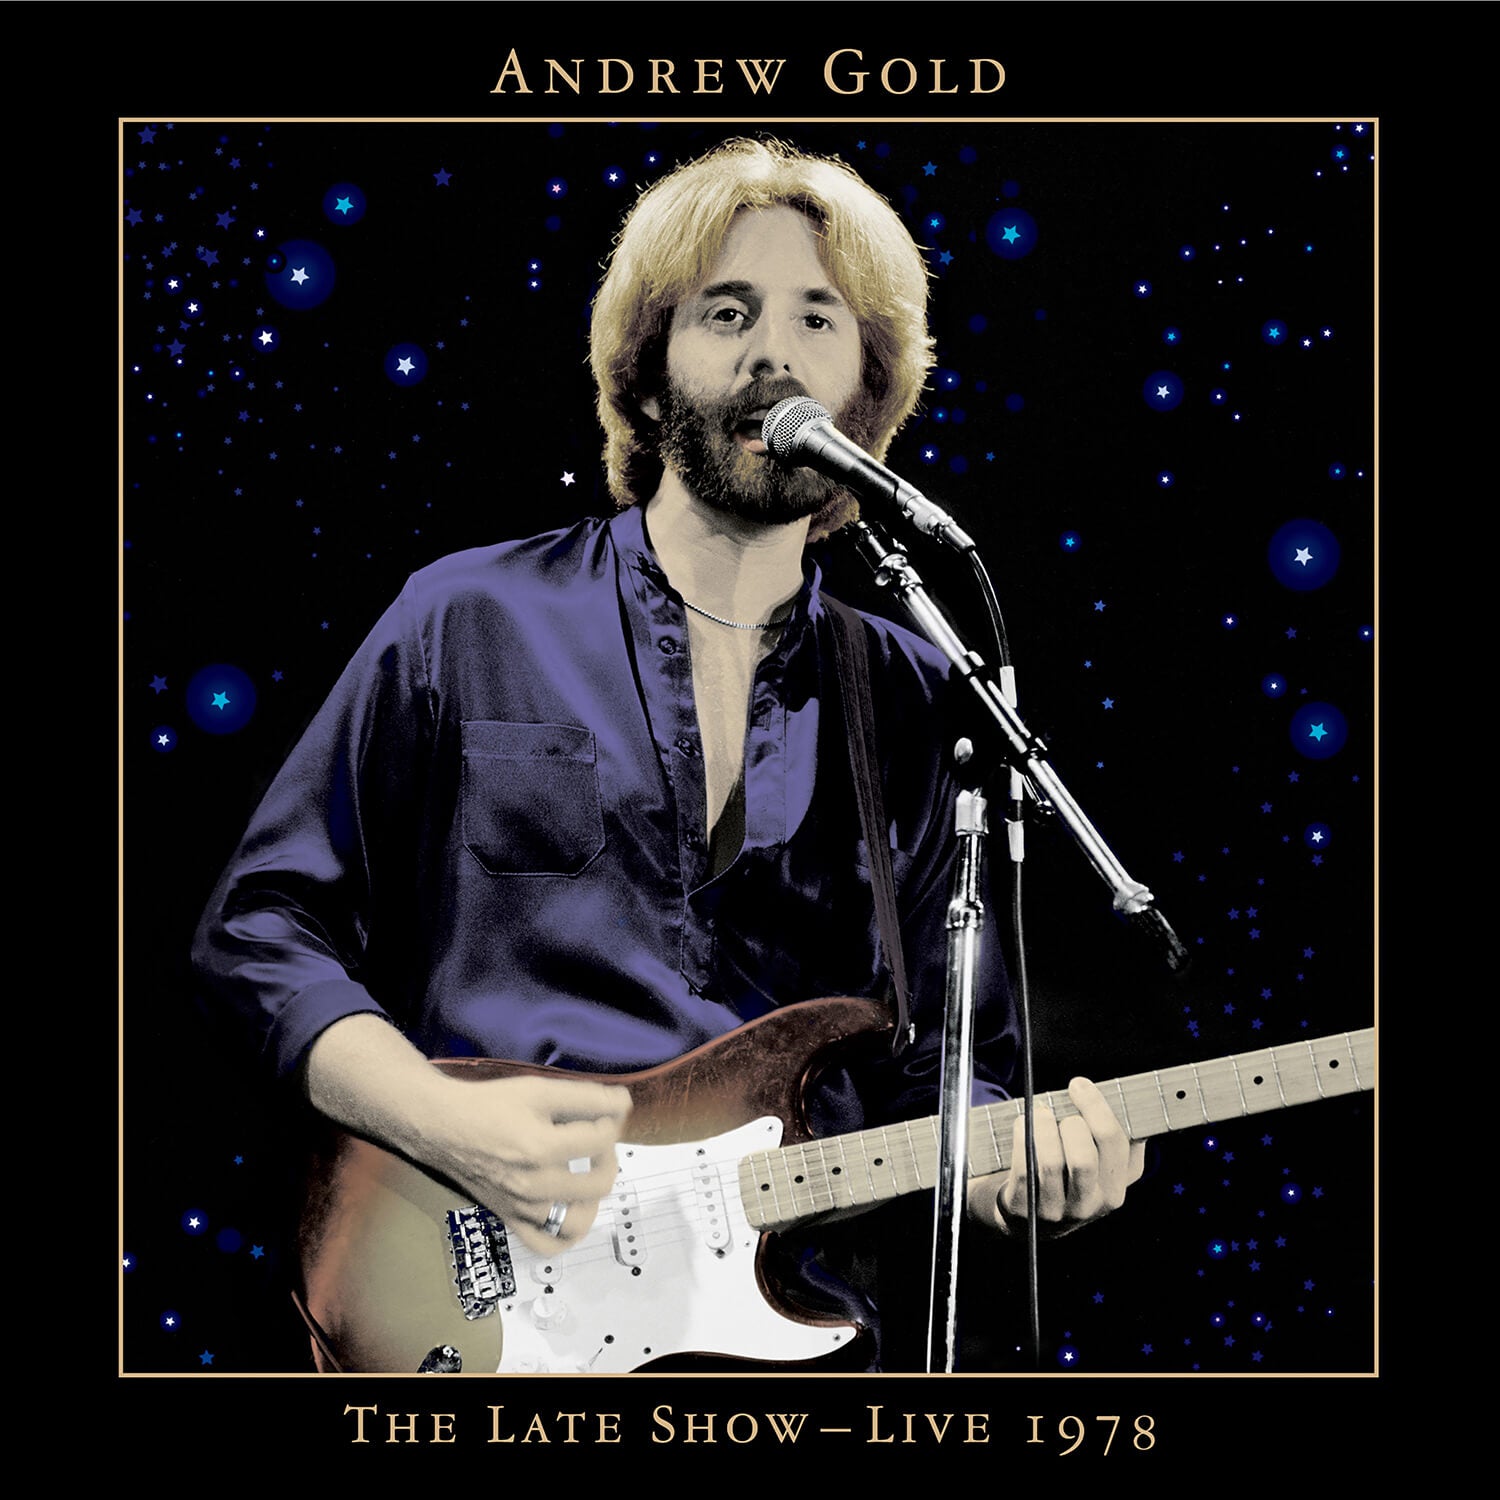 The Late Show – Live 1978